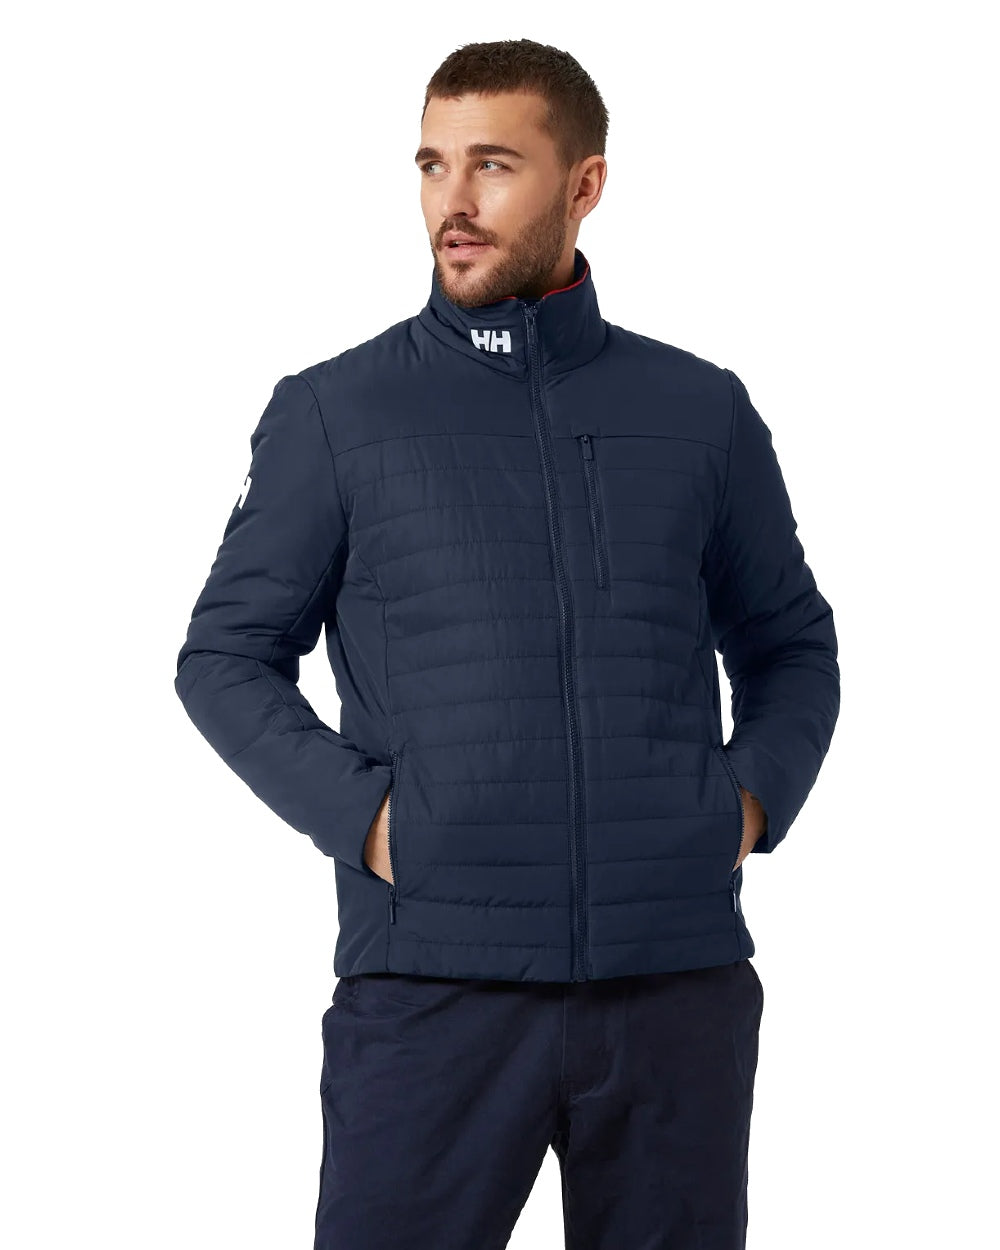 Helly Hansen Mens Crew Insulated Sailing Jacket 2.0 in Navy 